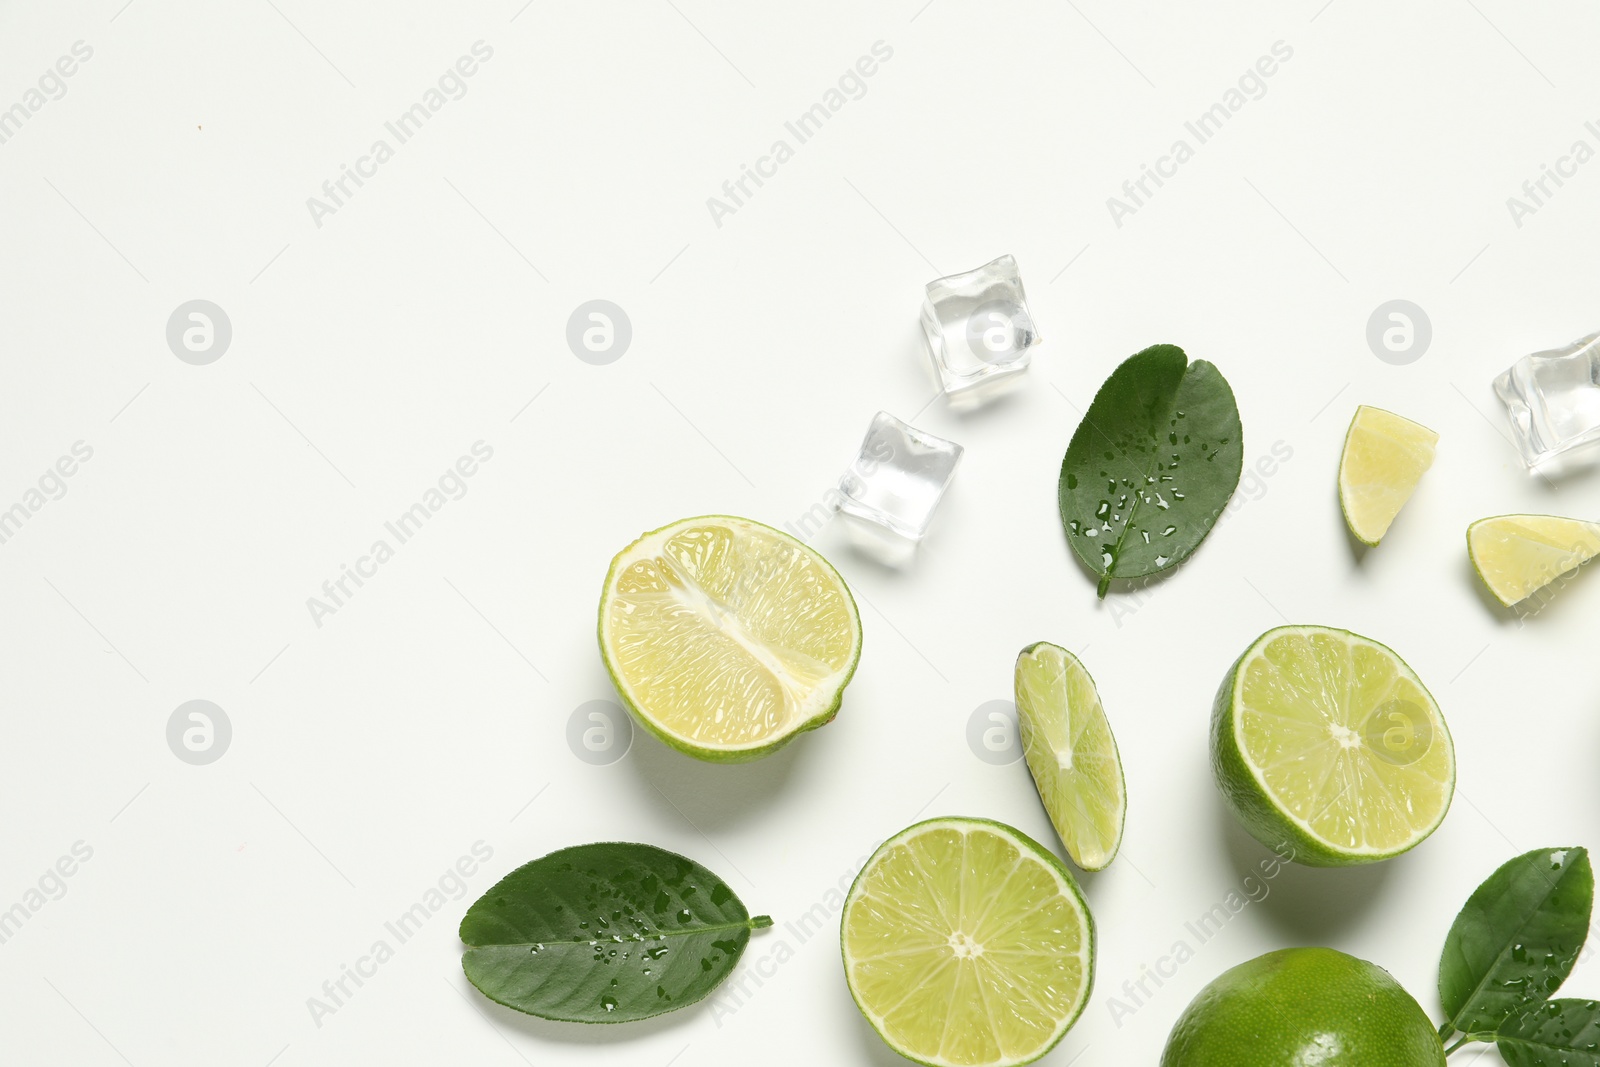 Photo of Fresh ripe limes with green leaves and ice cubes on white background, flat lay